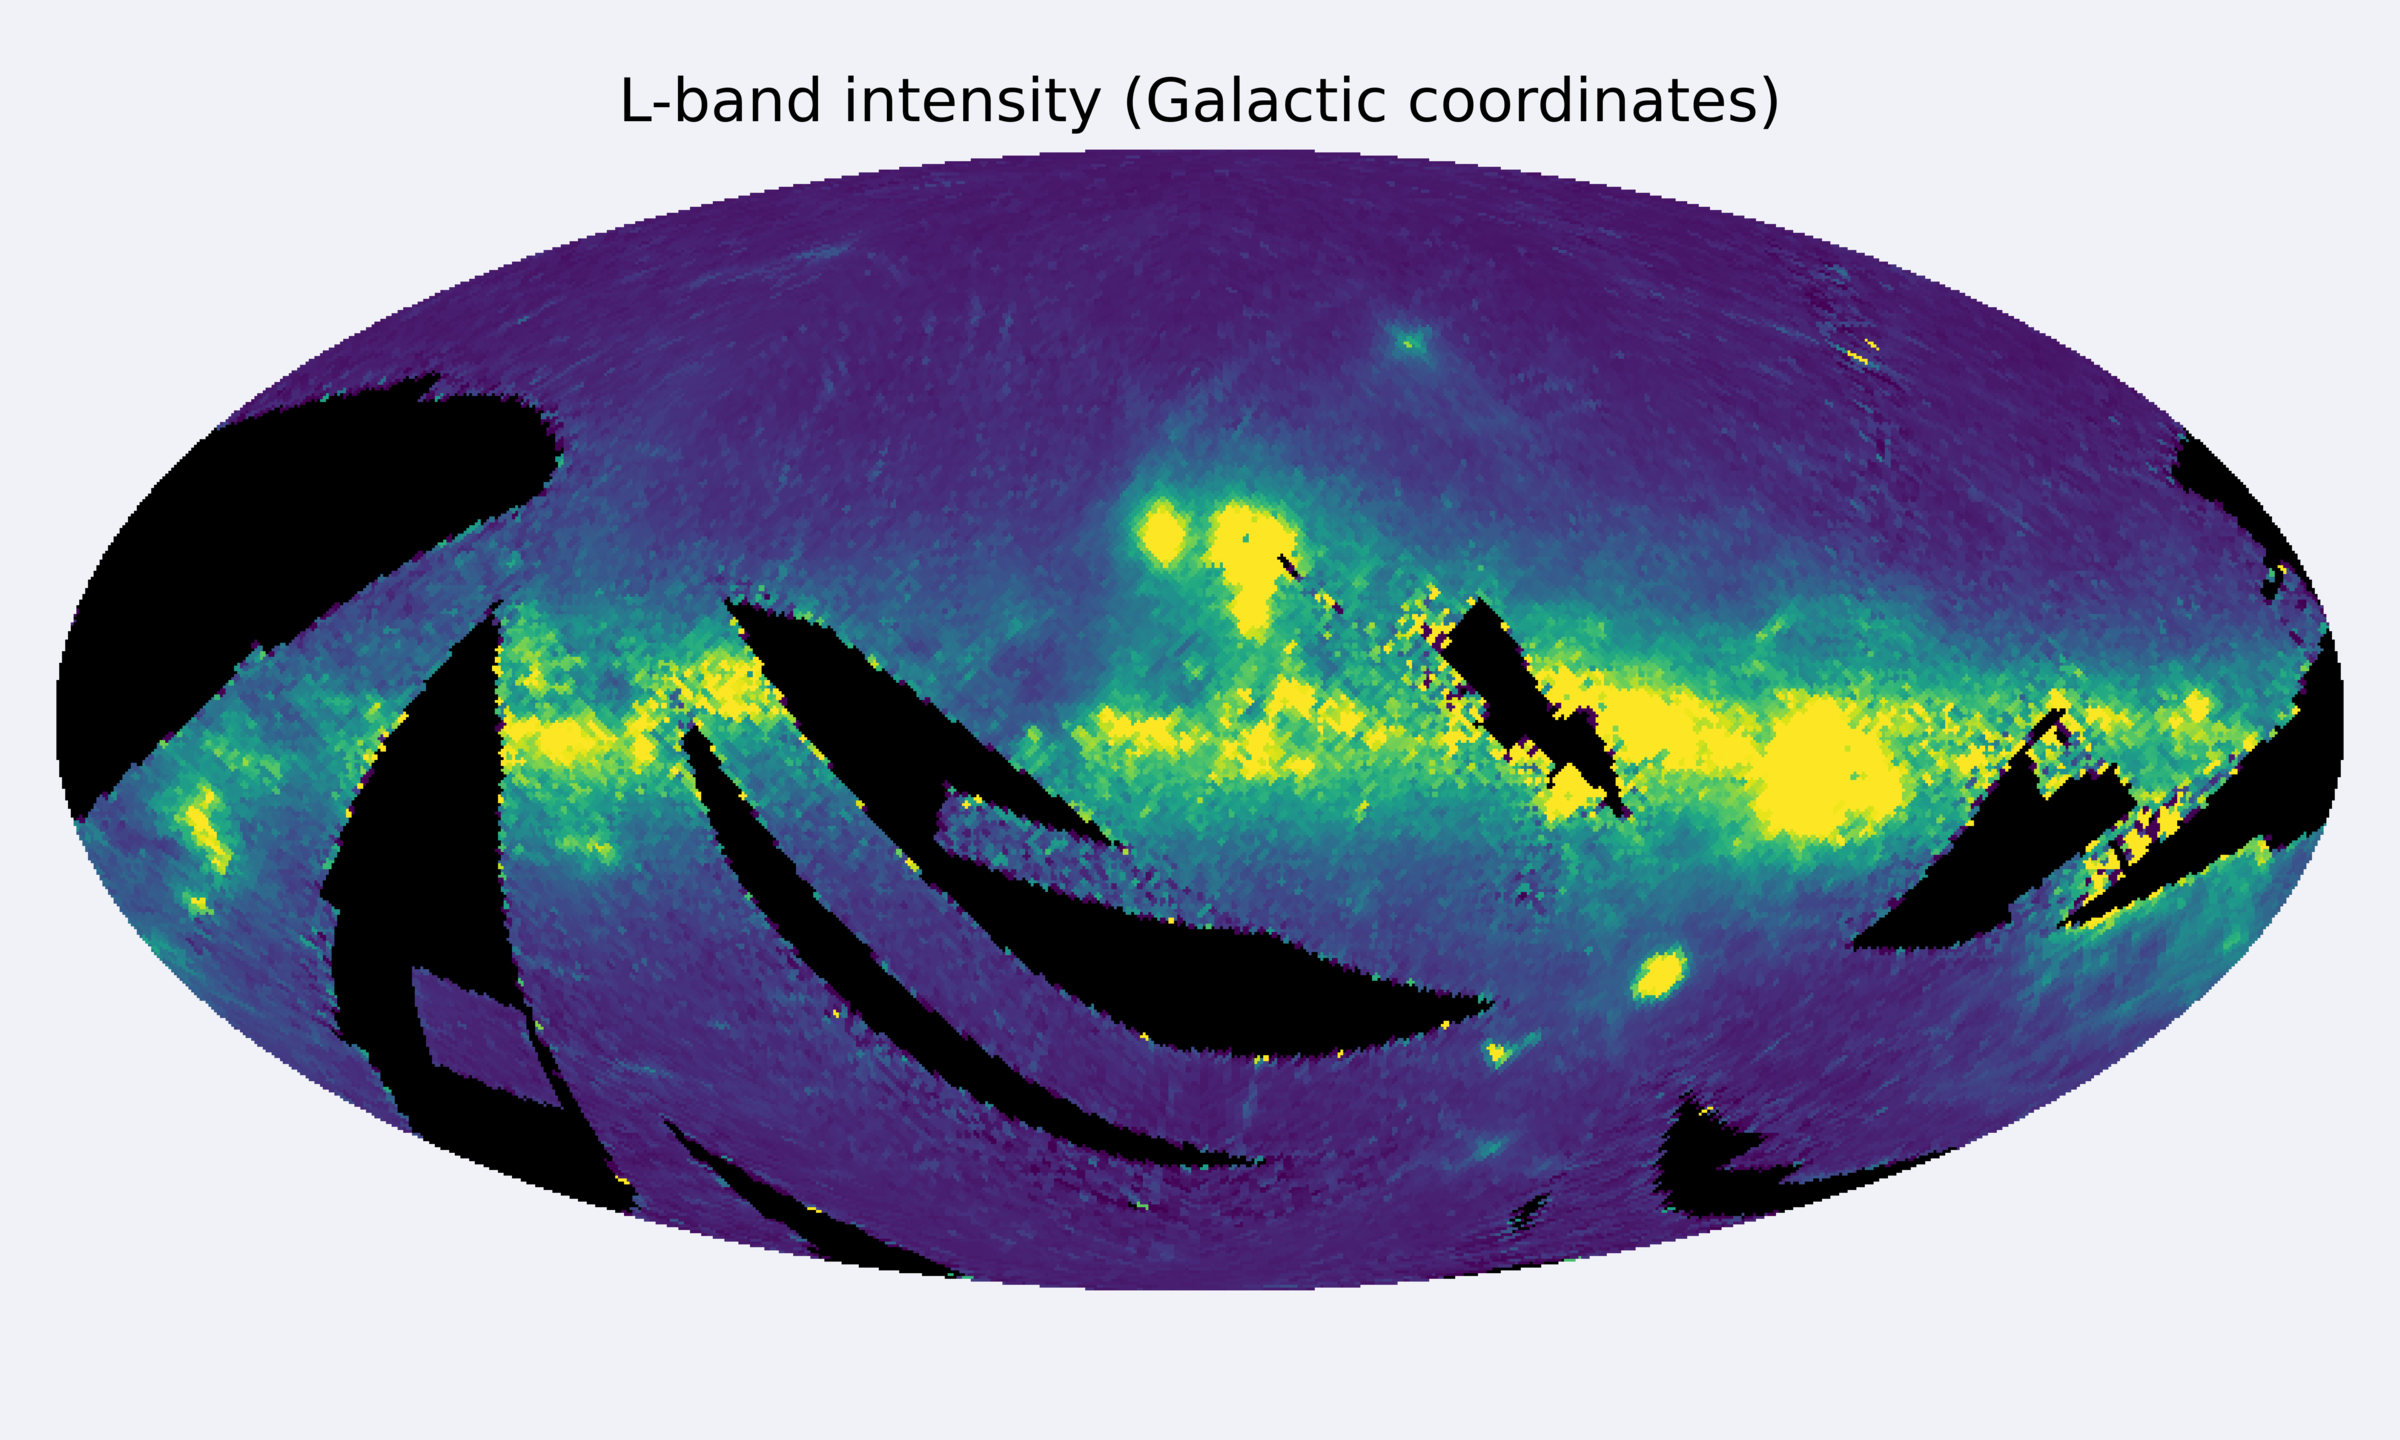 All-sky intensity map showing bright, complex morphology in the Galactic plane. About 20% of the sky has no data.